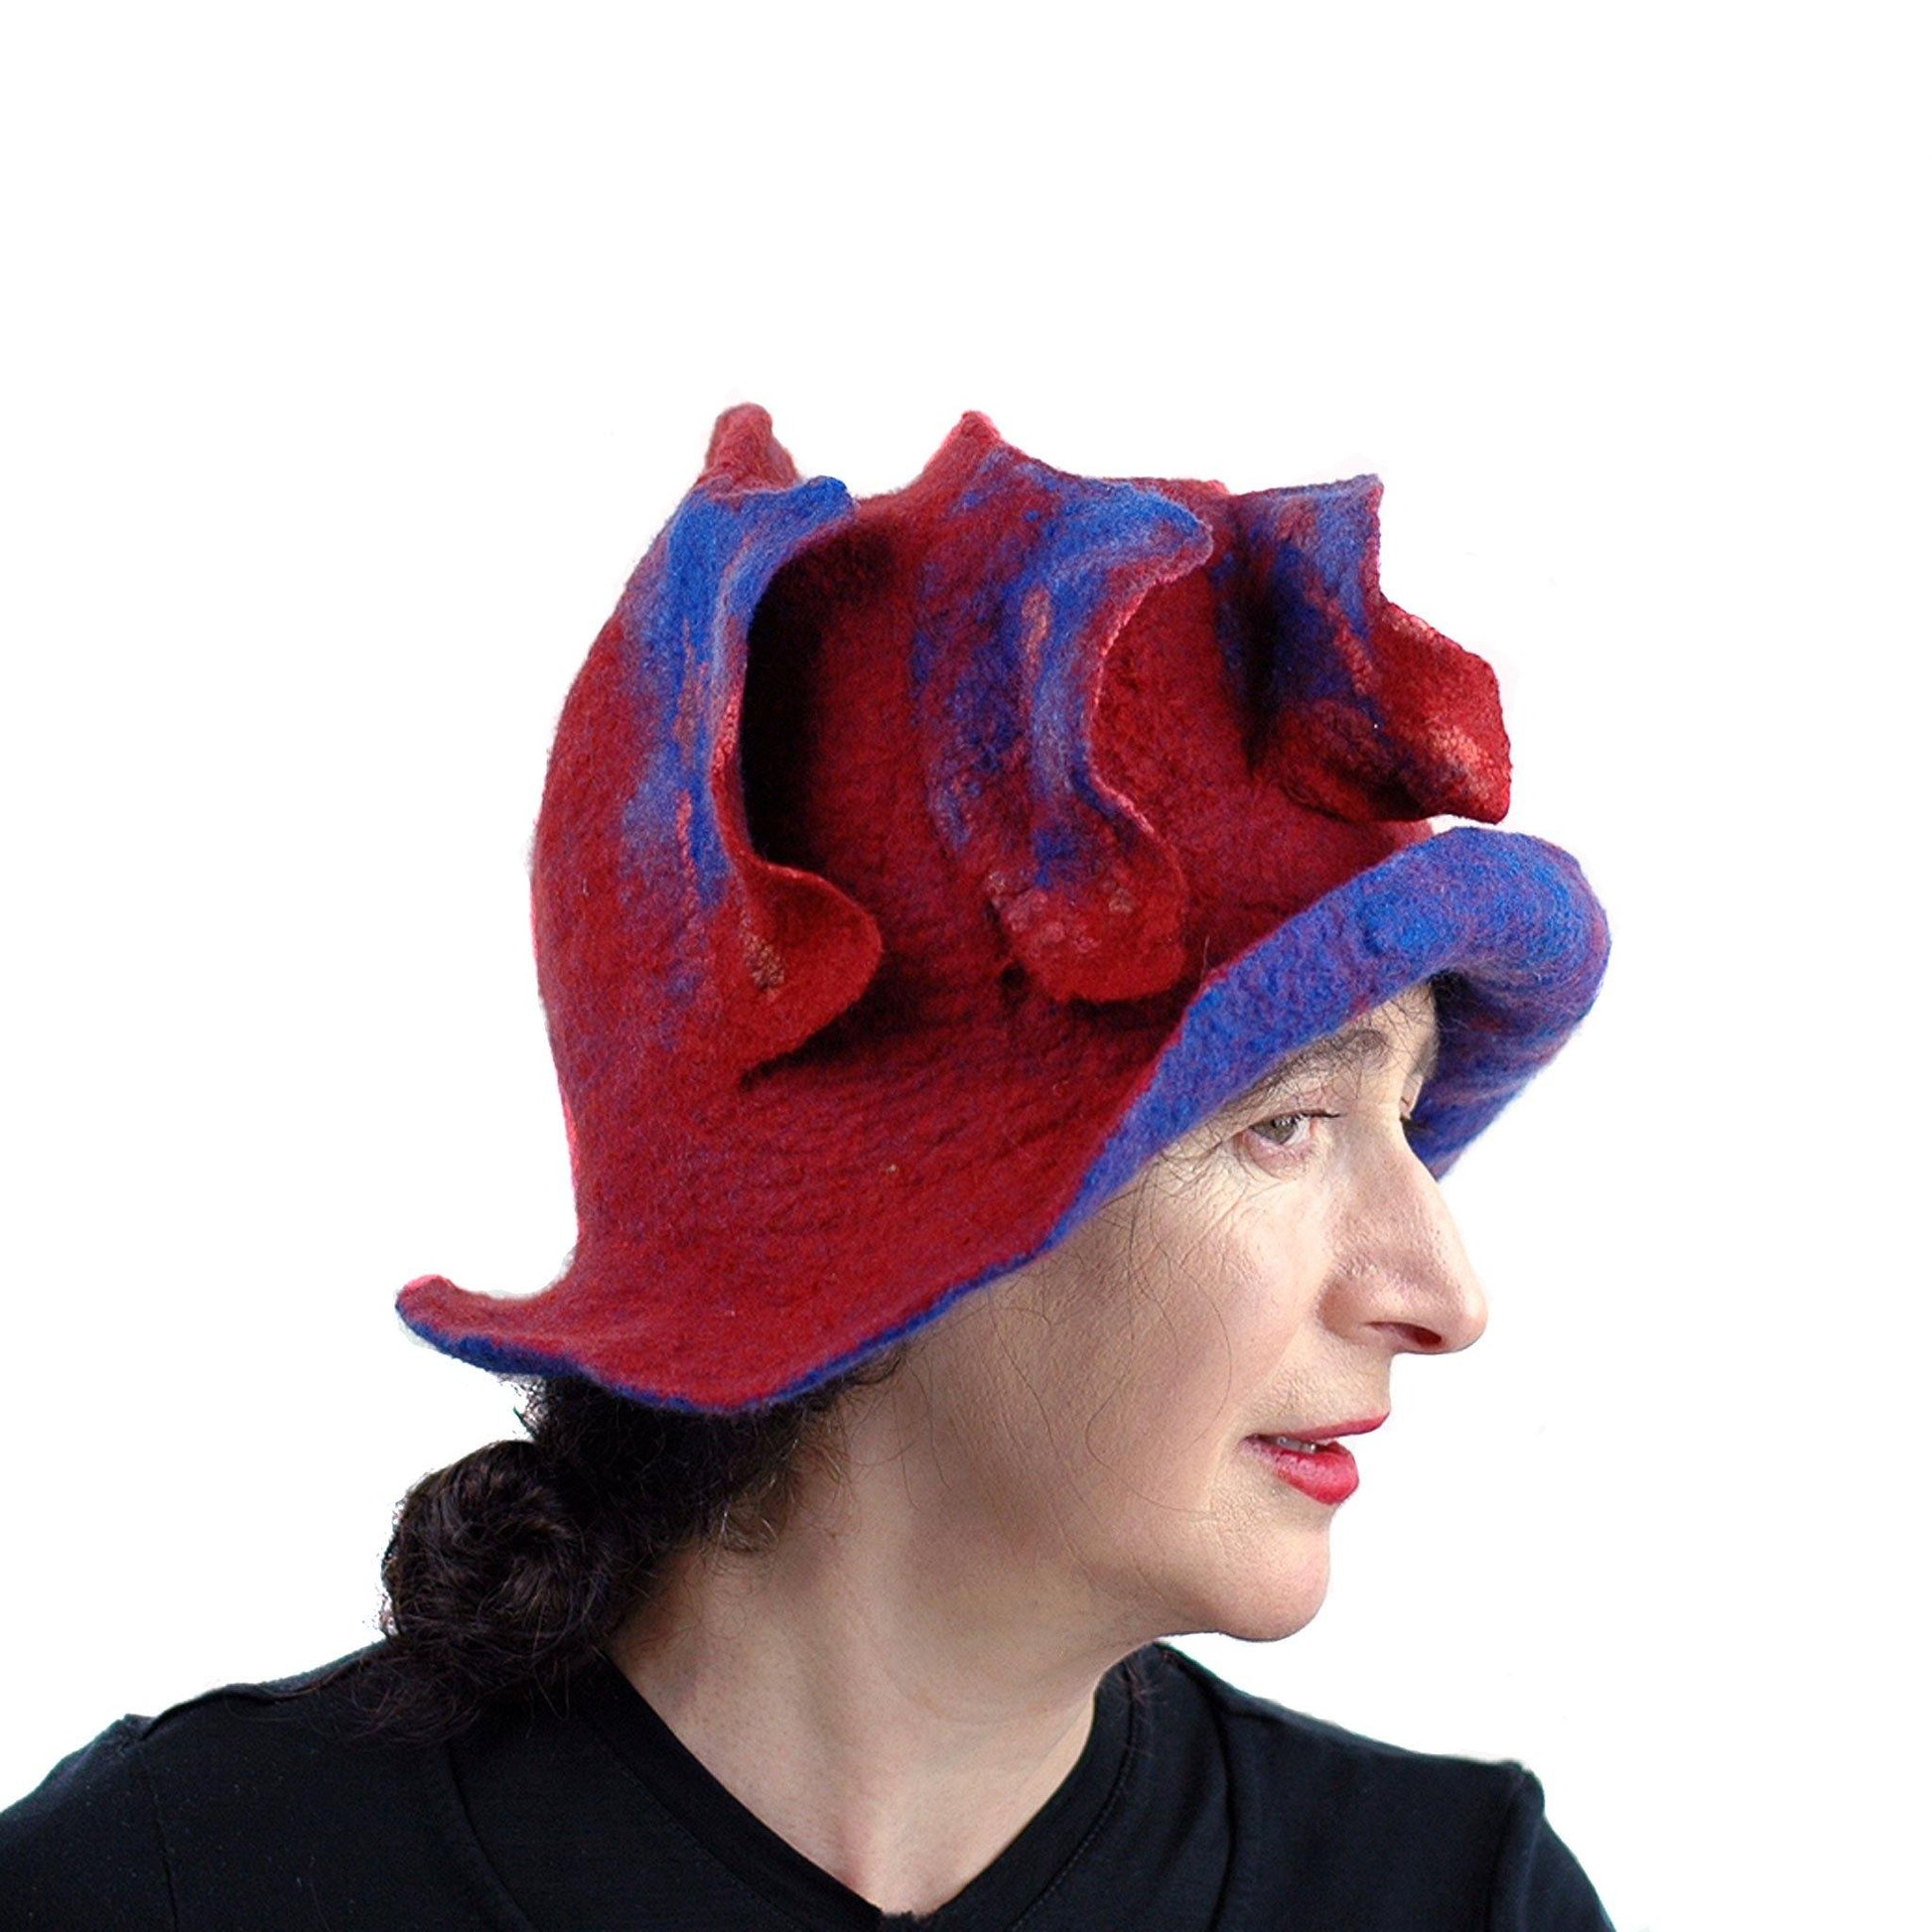 Big Brimmed Red and Blue Felted Hat - side view 3 - with the felted 'Waves' showing on the side.